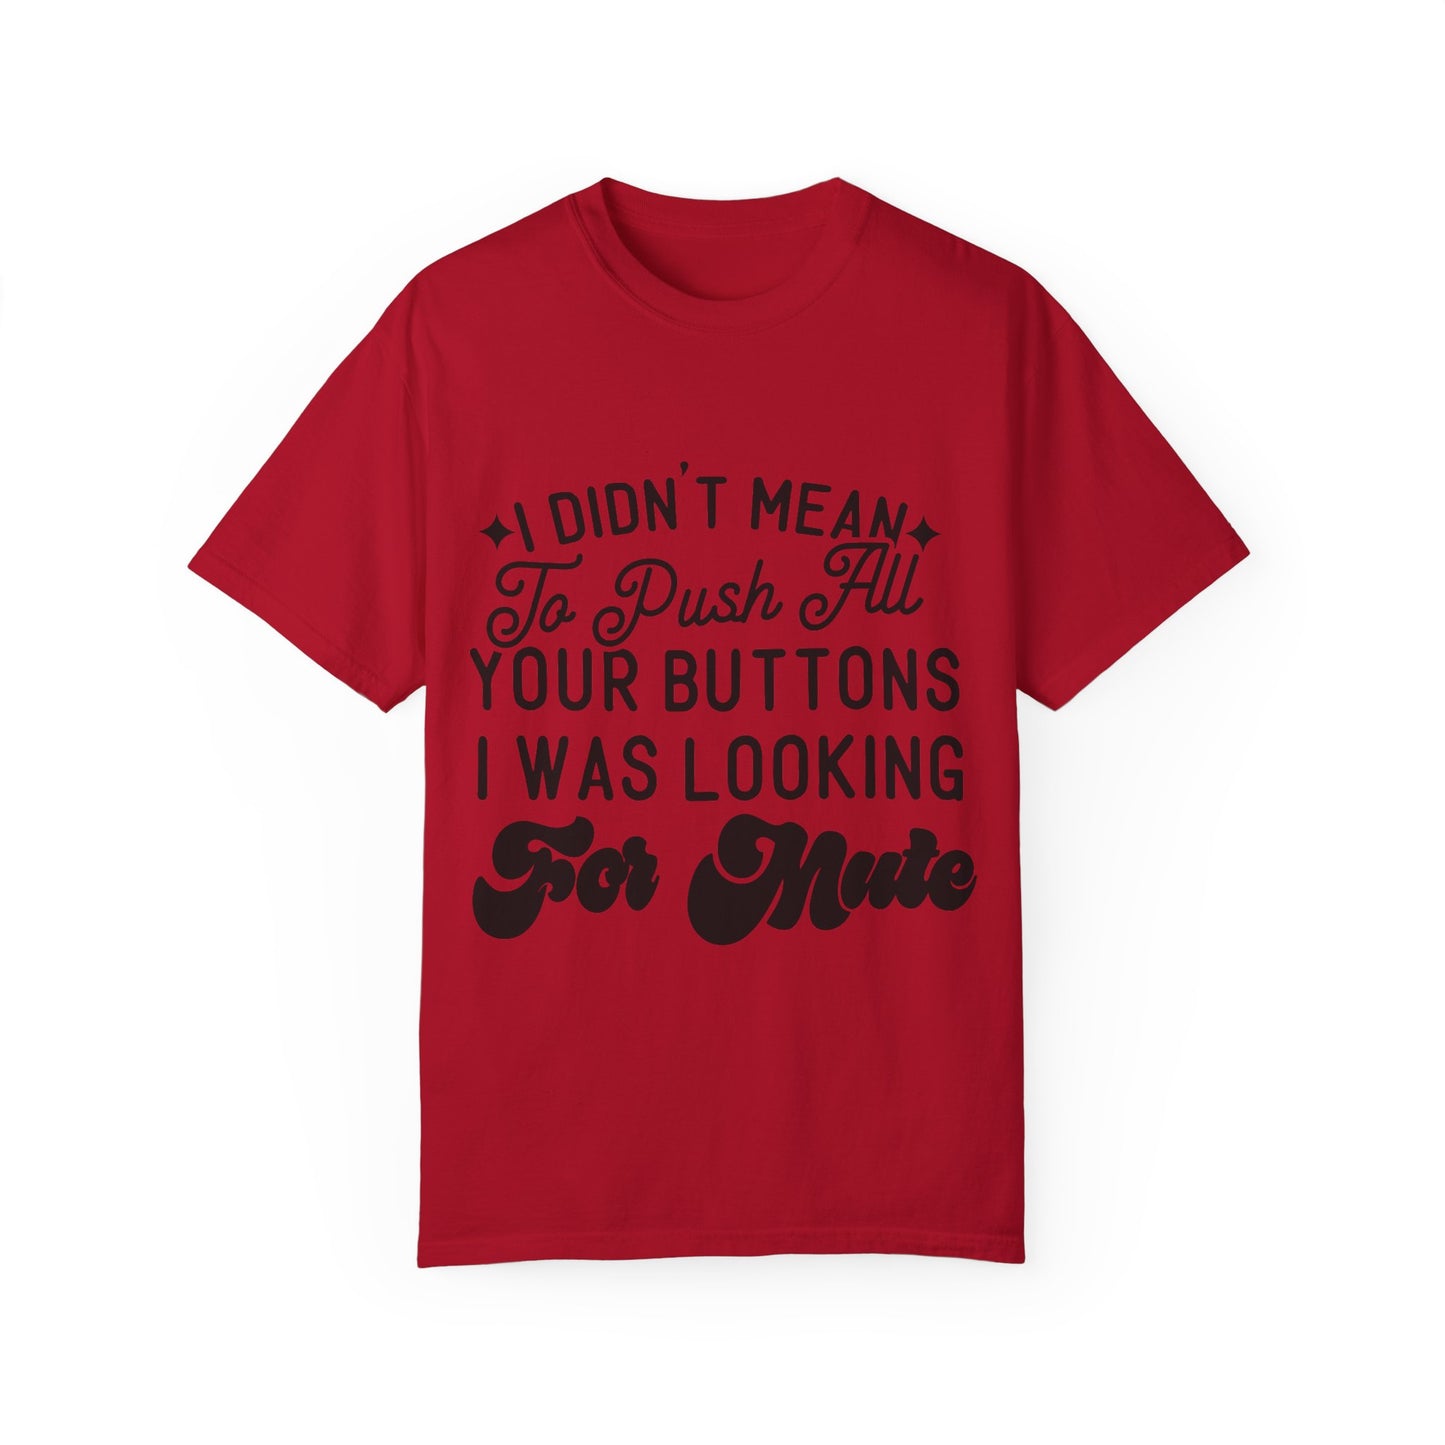 I don't mean to push all your buttons - Unisex Garment-Dyed T-shirt